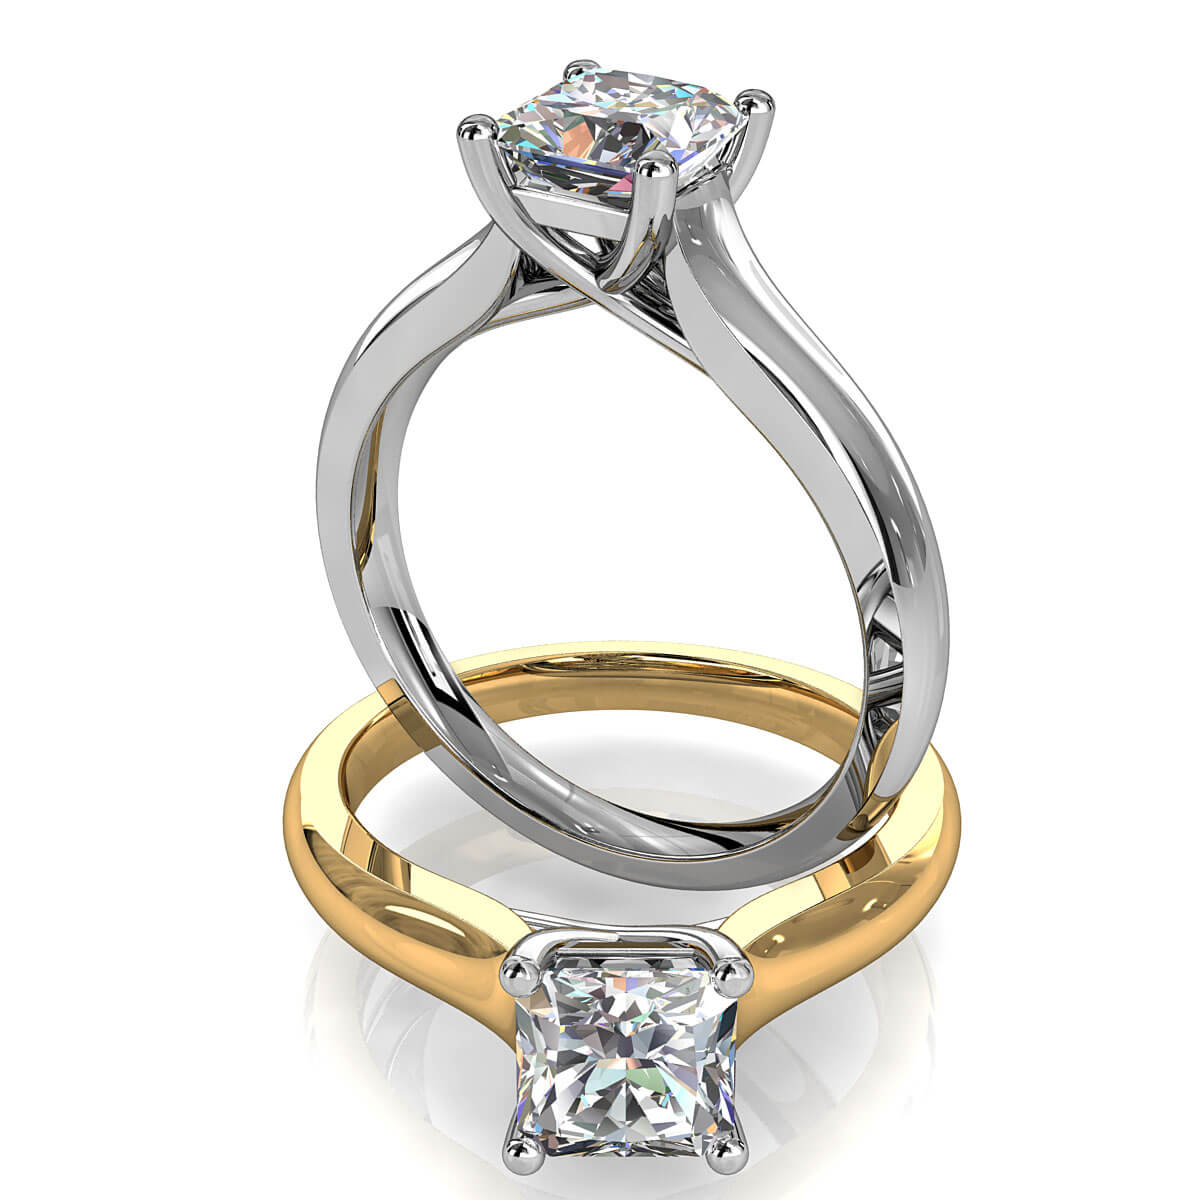 Princess Cut Solitaire Diamond Engagement Ring, 4 Claws on a Wide Band with an Undersweep Setting.